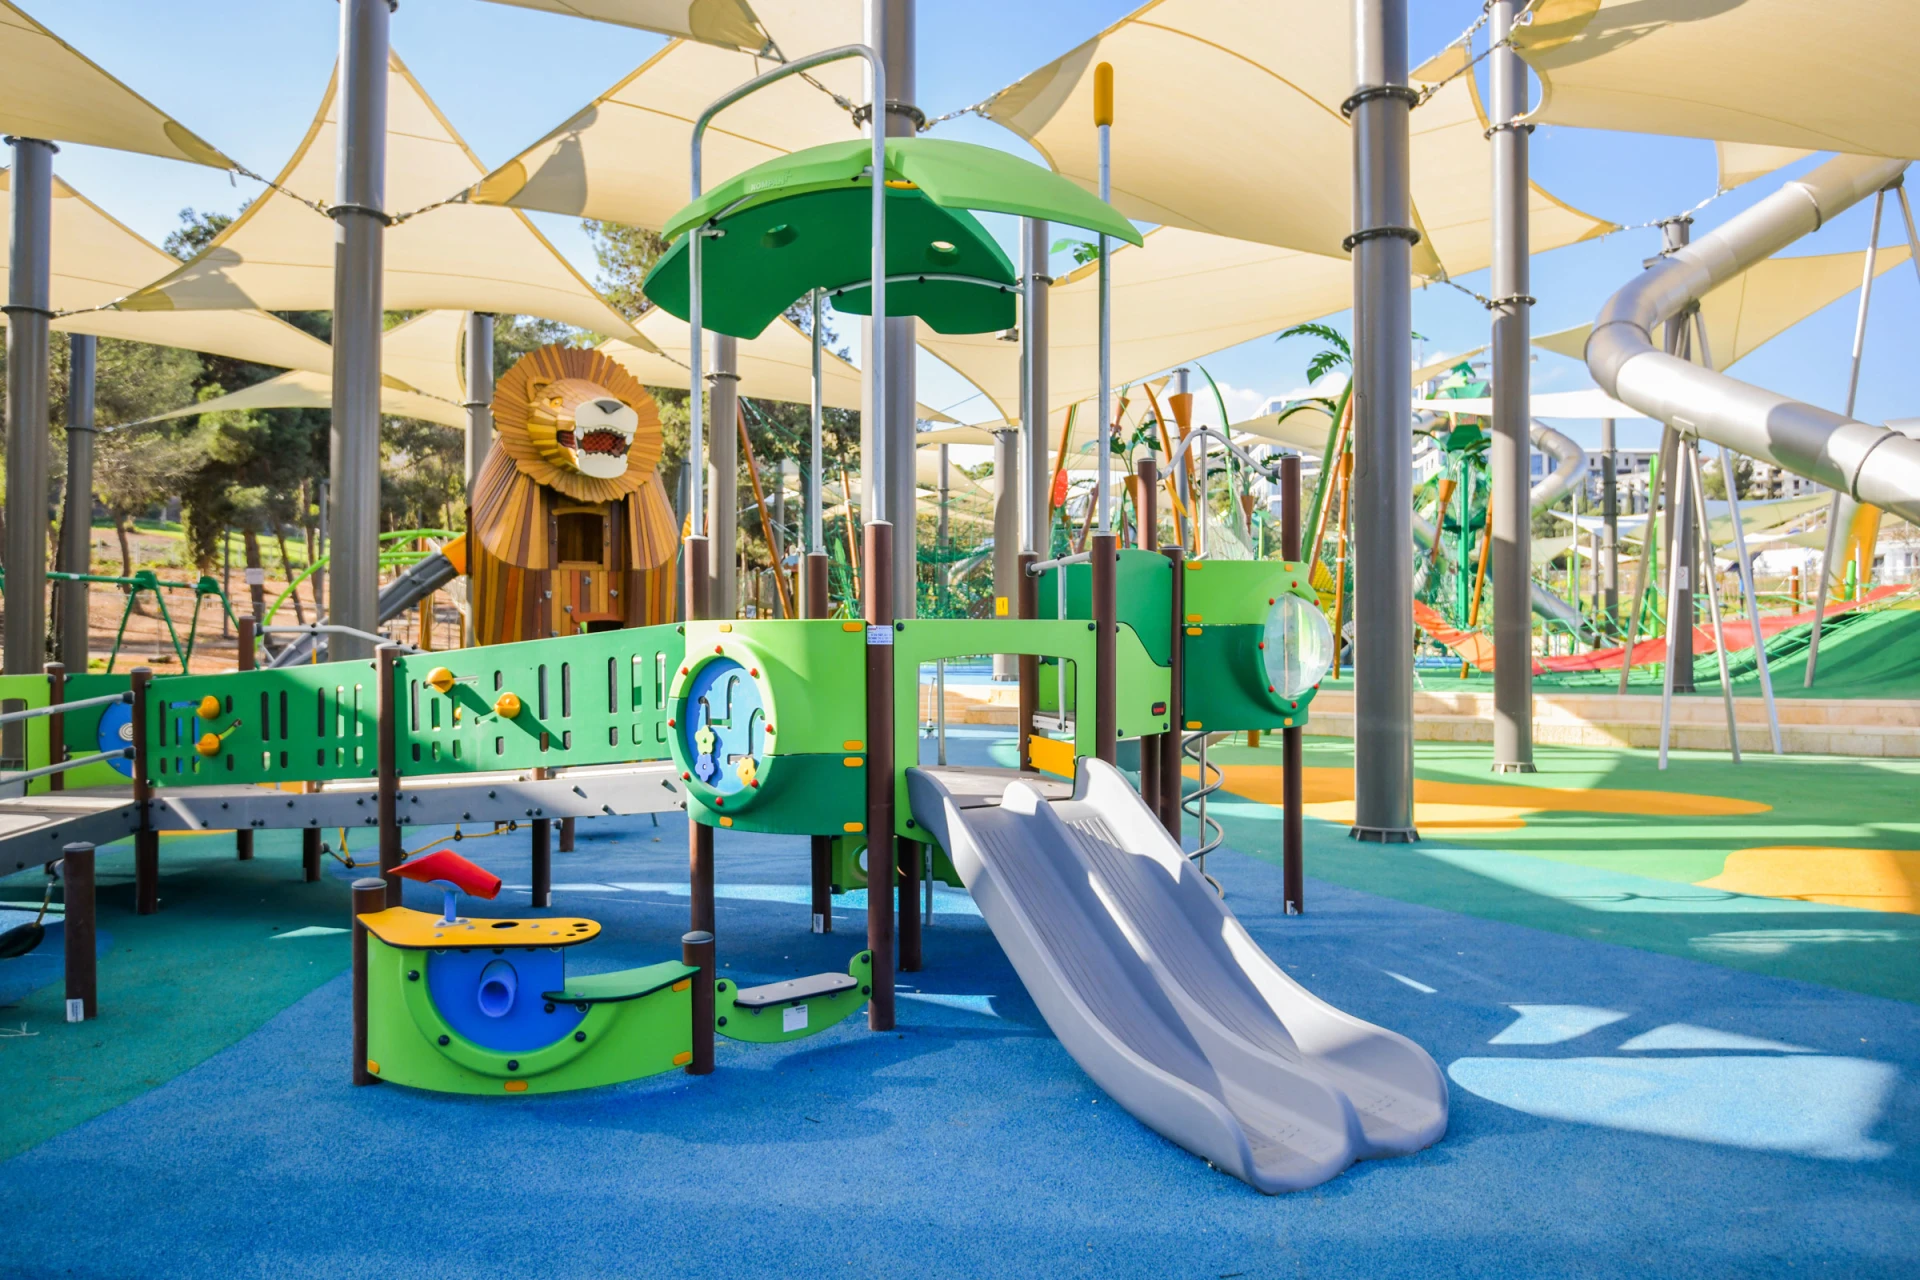 playground systems for toddlers in Jerusalem Sacher park